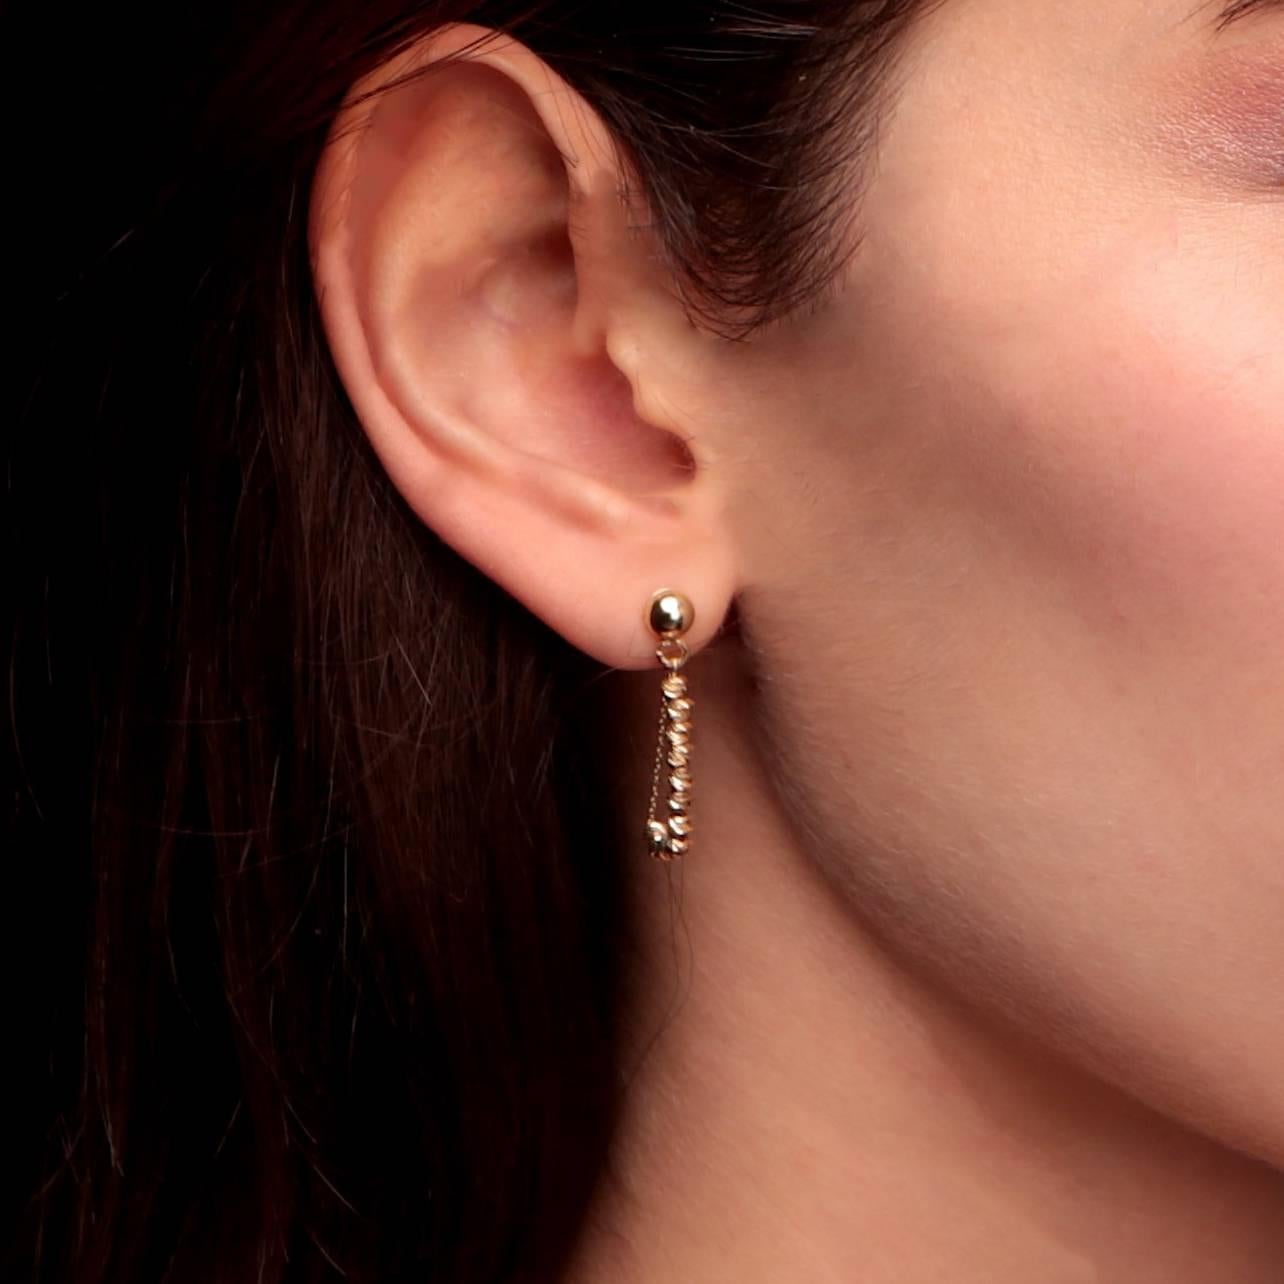 The Ellie Drop Earrings are made out of 14kt gold and have a sparkling effect due to the special diamond cut of the gold.

The item is hallmarked by the London Assay Office.